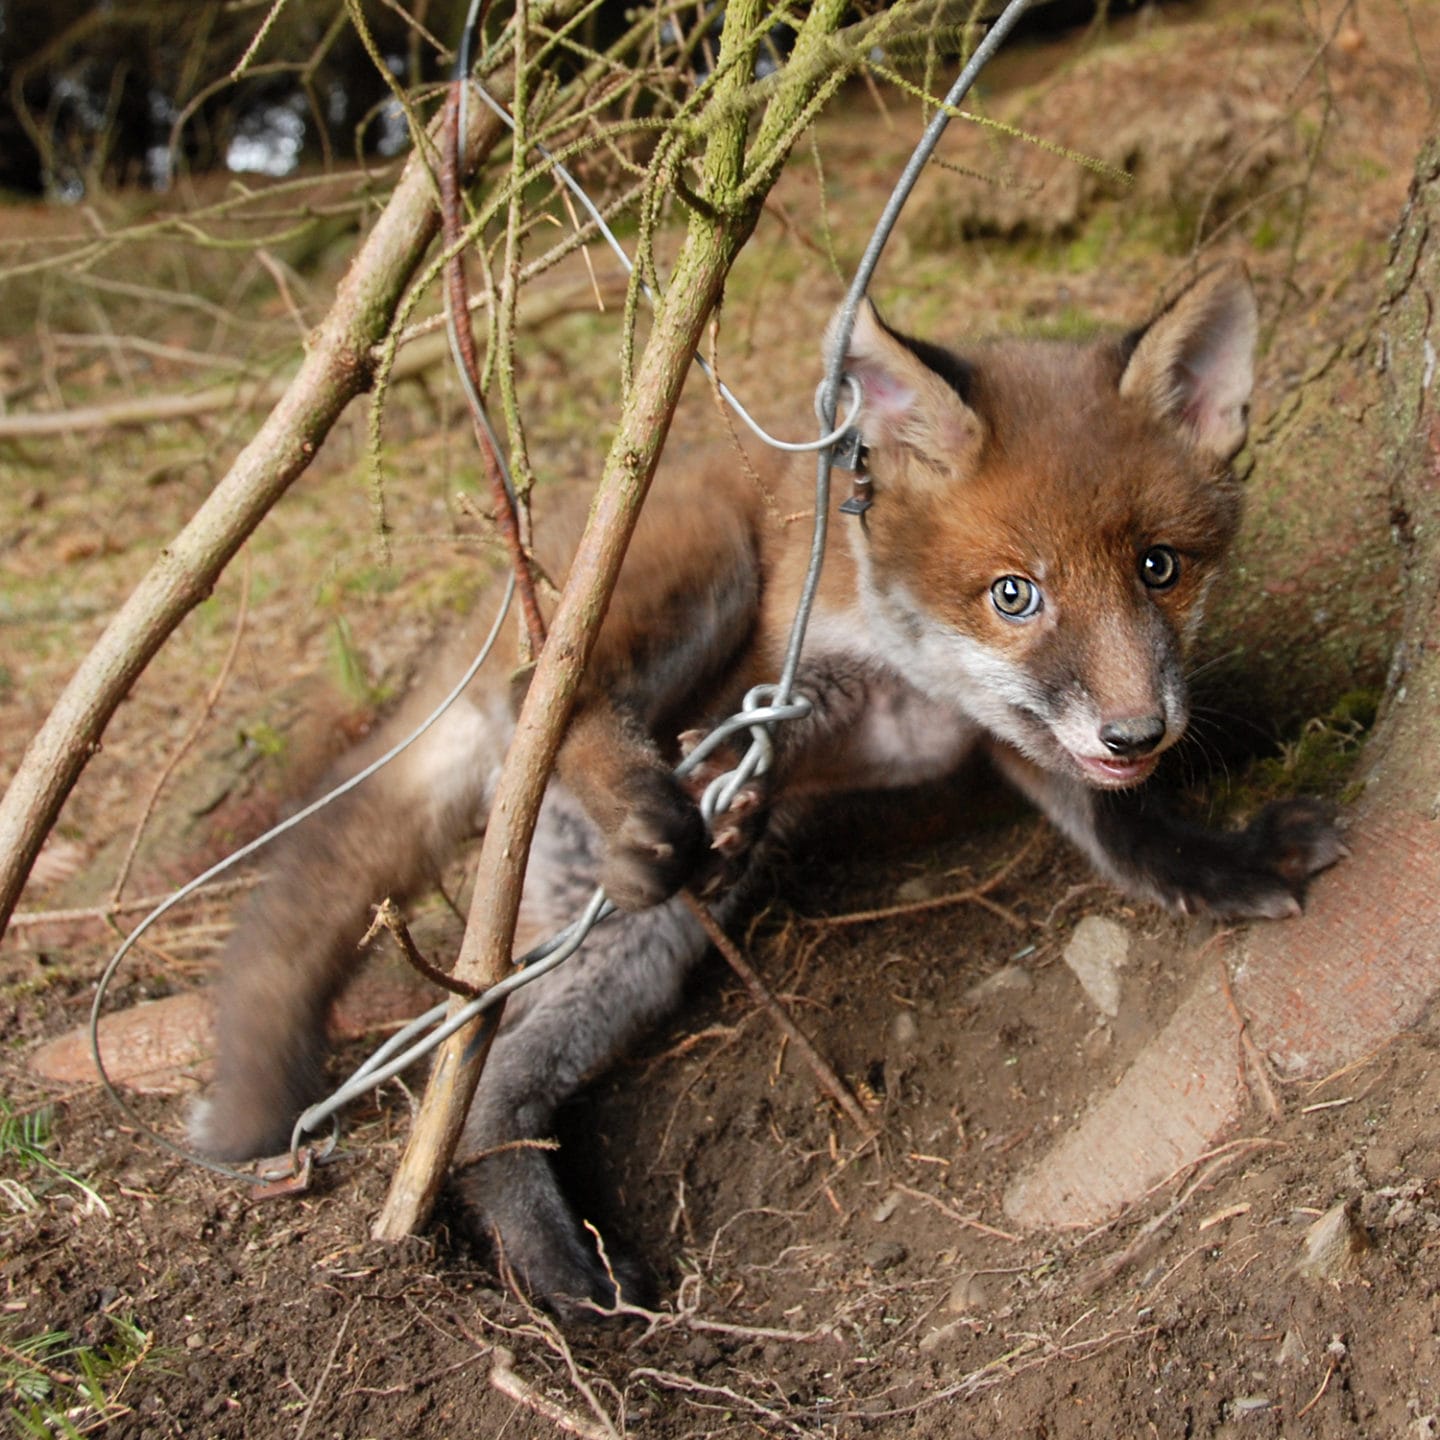 Snare traps killing and injuring pets and protected species, claims report